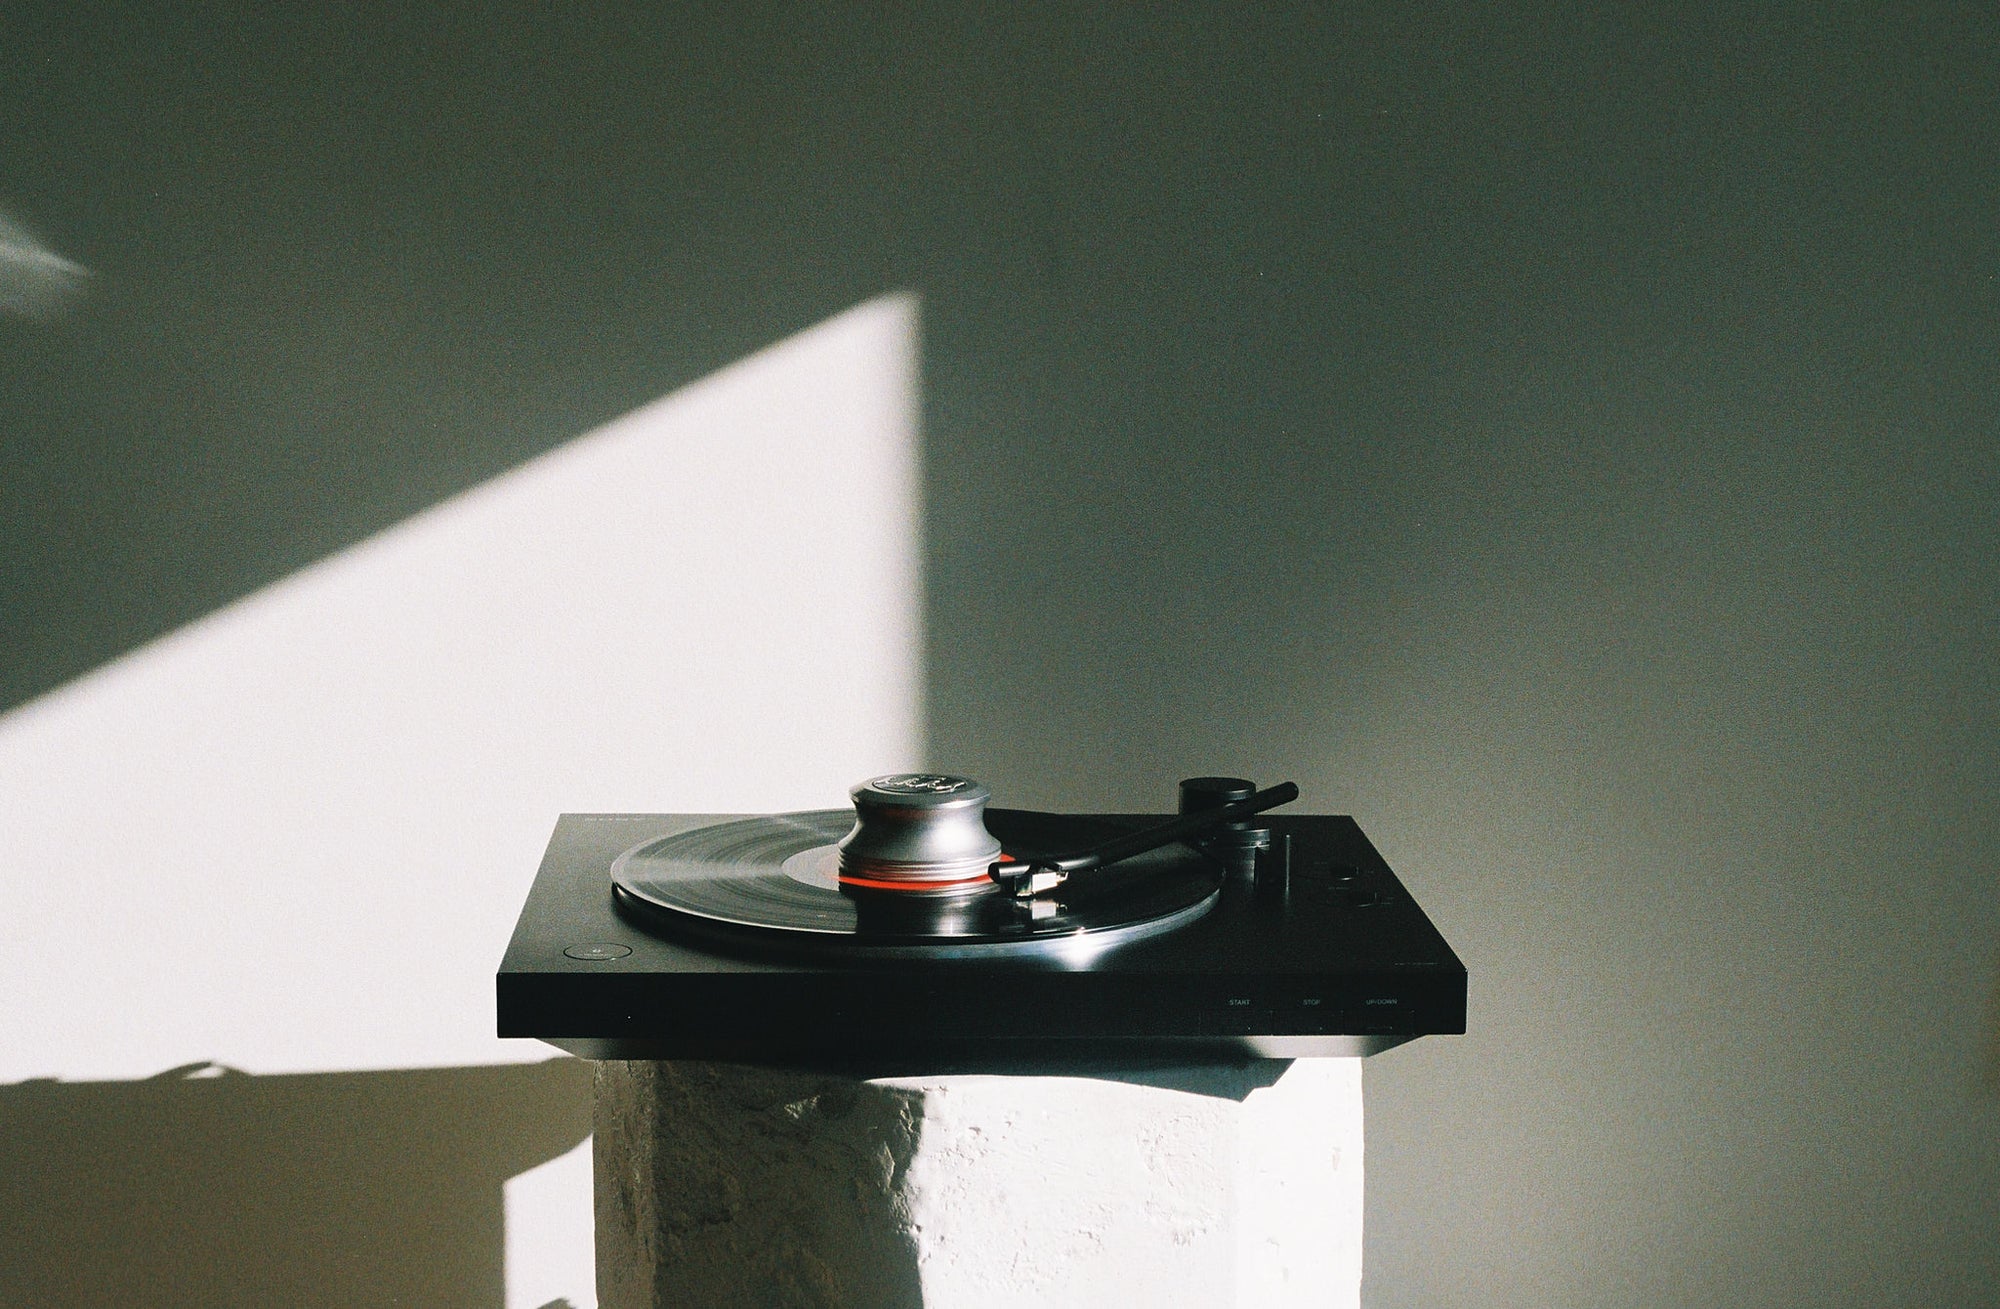 Precious Sound Record Stabilizer Beatles Edition on a record player in the sunlight